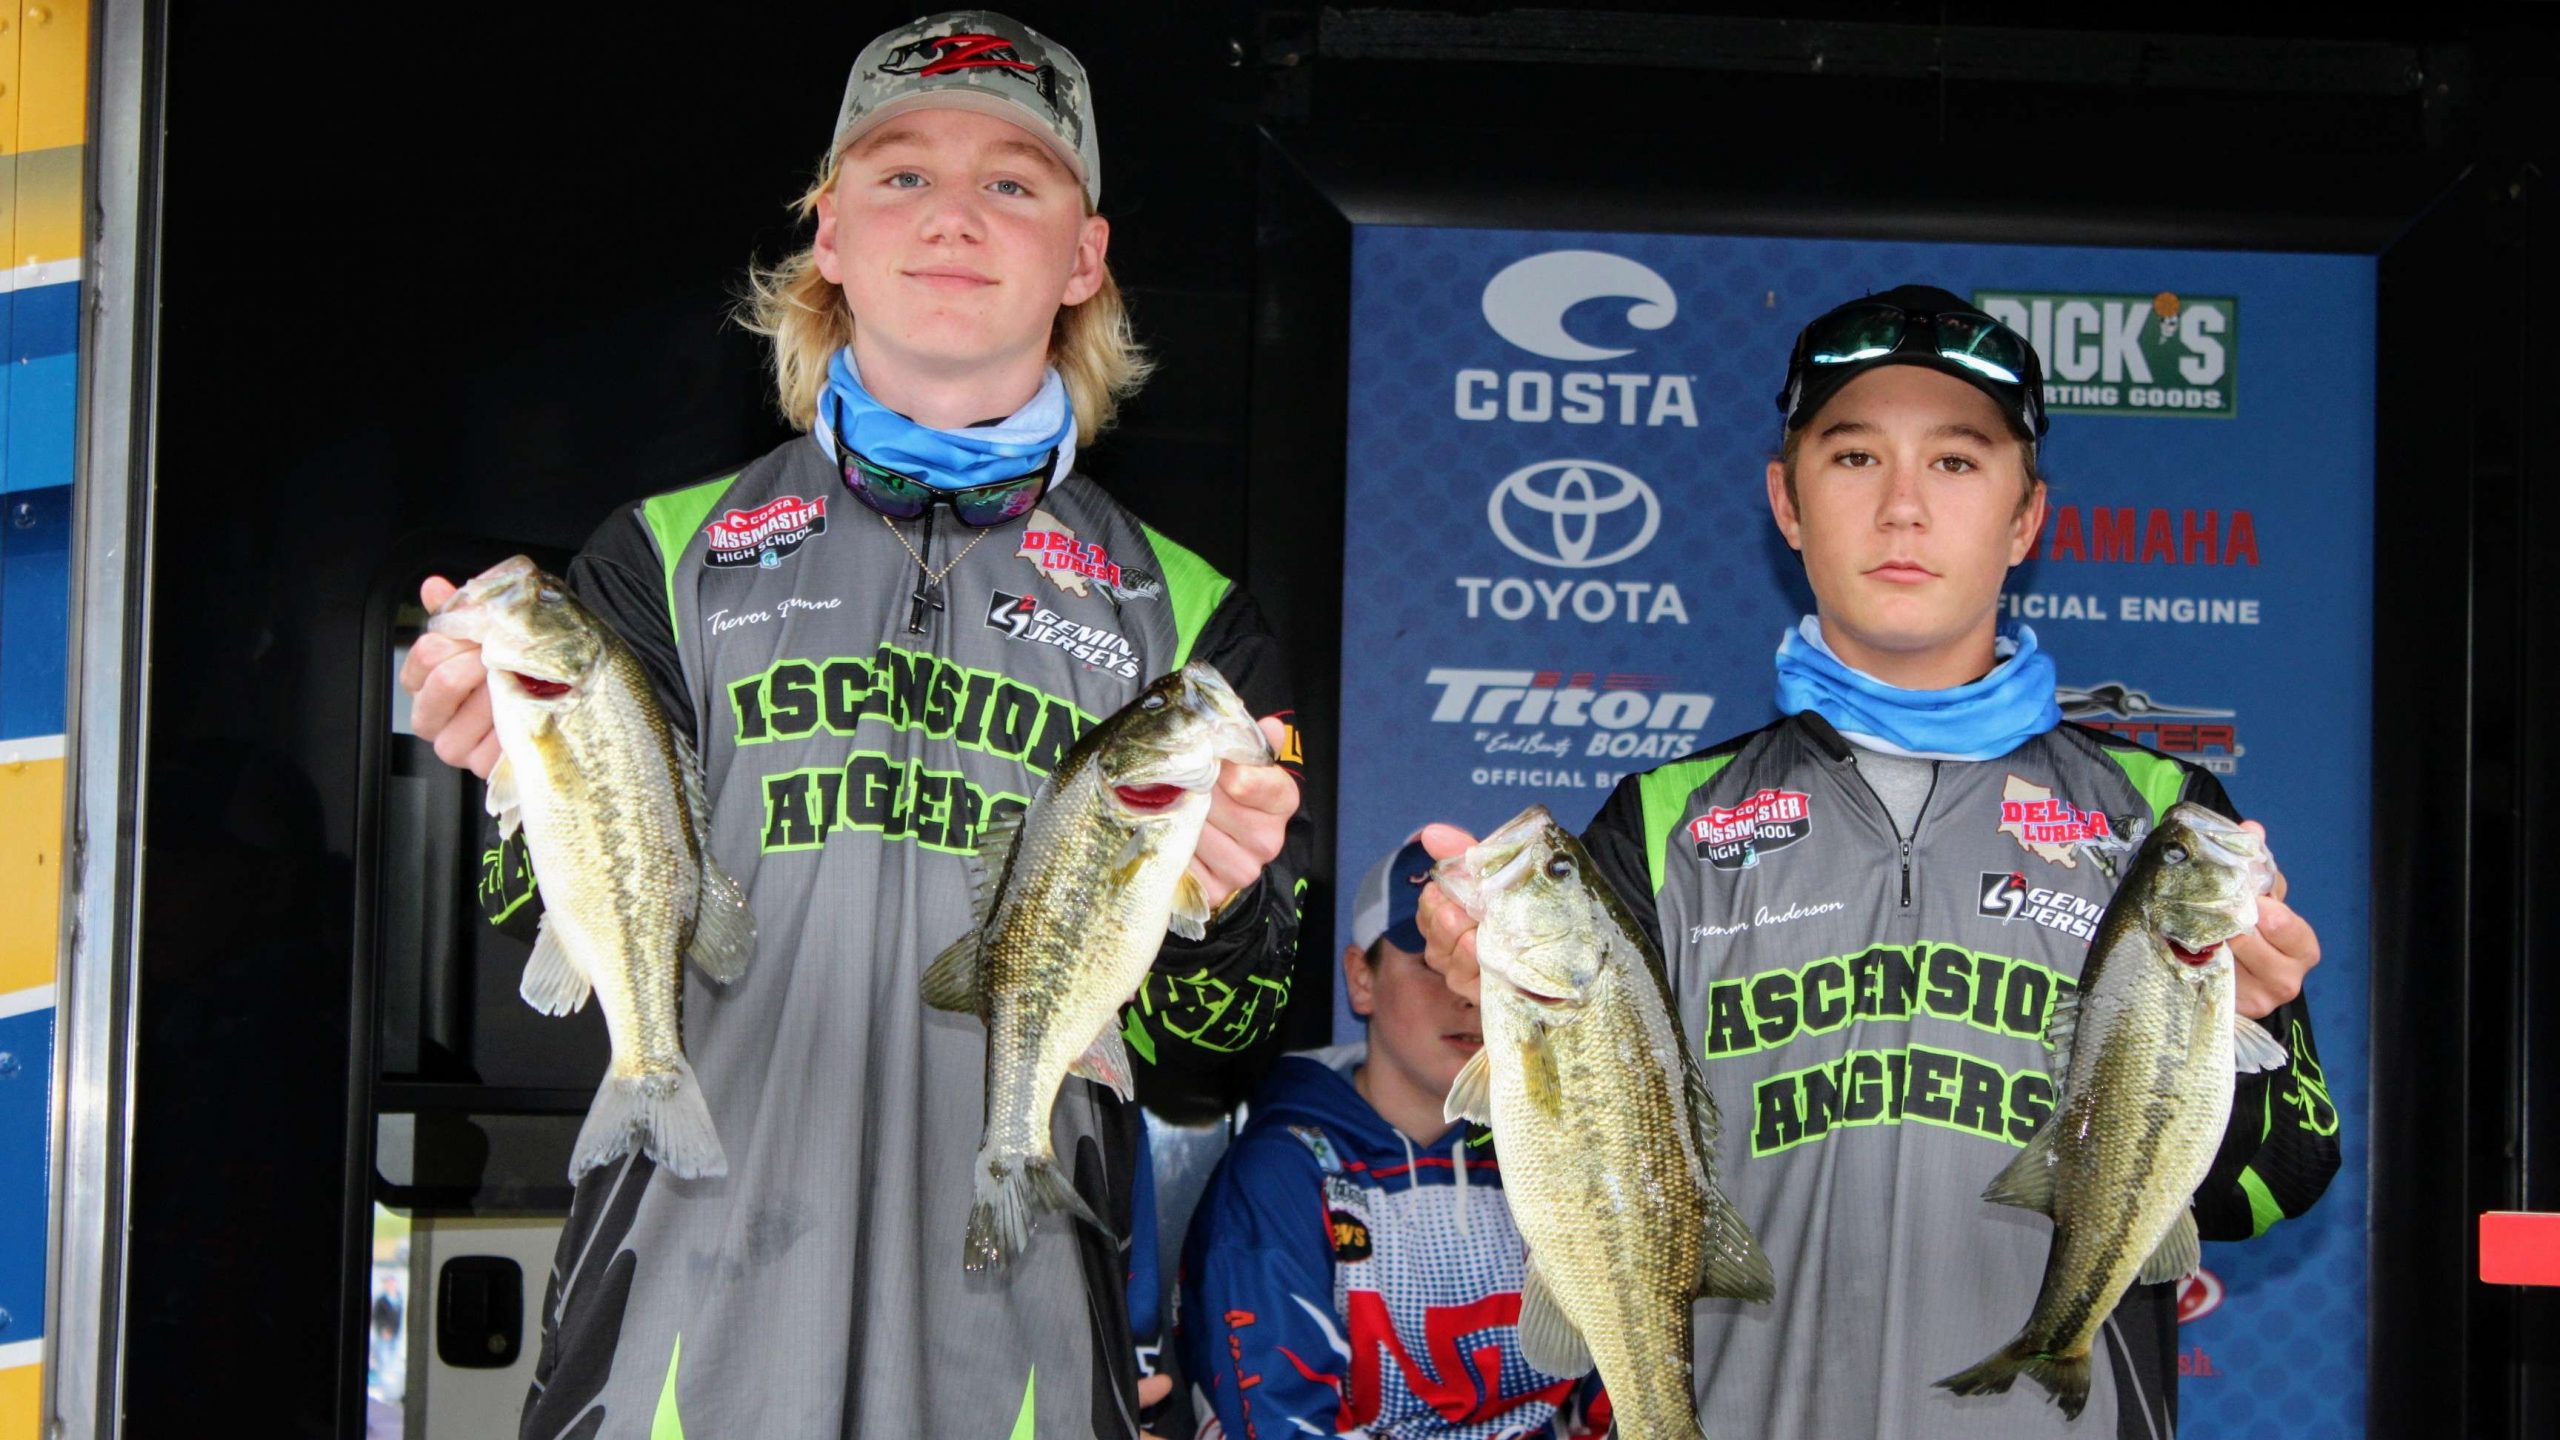 Trevor Dunne and Brennan Anderson of the Ascension (La.) Anglers
  finished in a tie for 82nd with 9-12.
